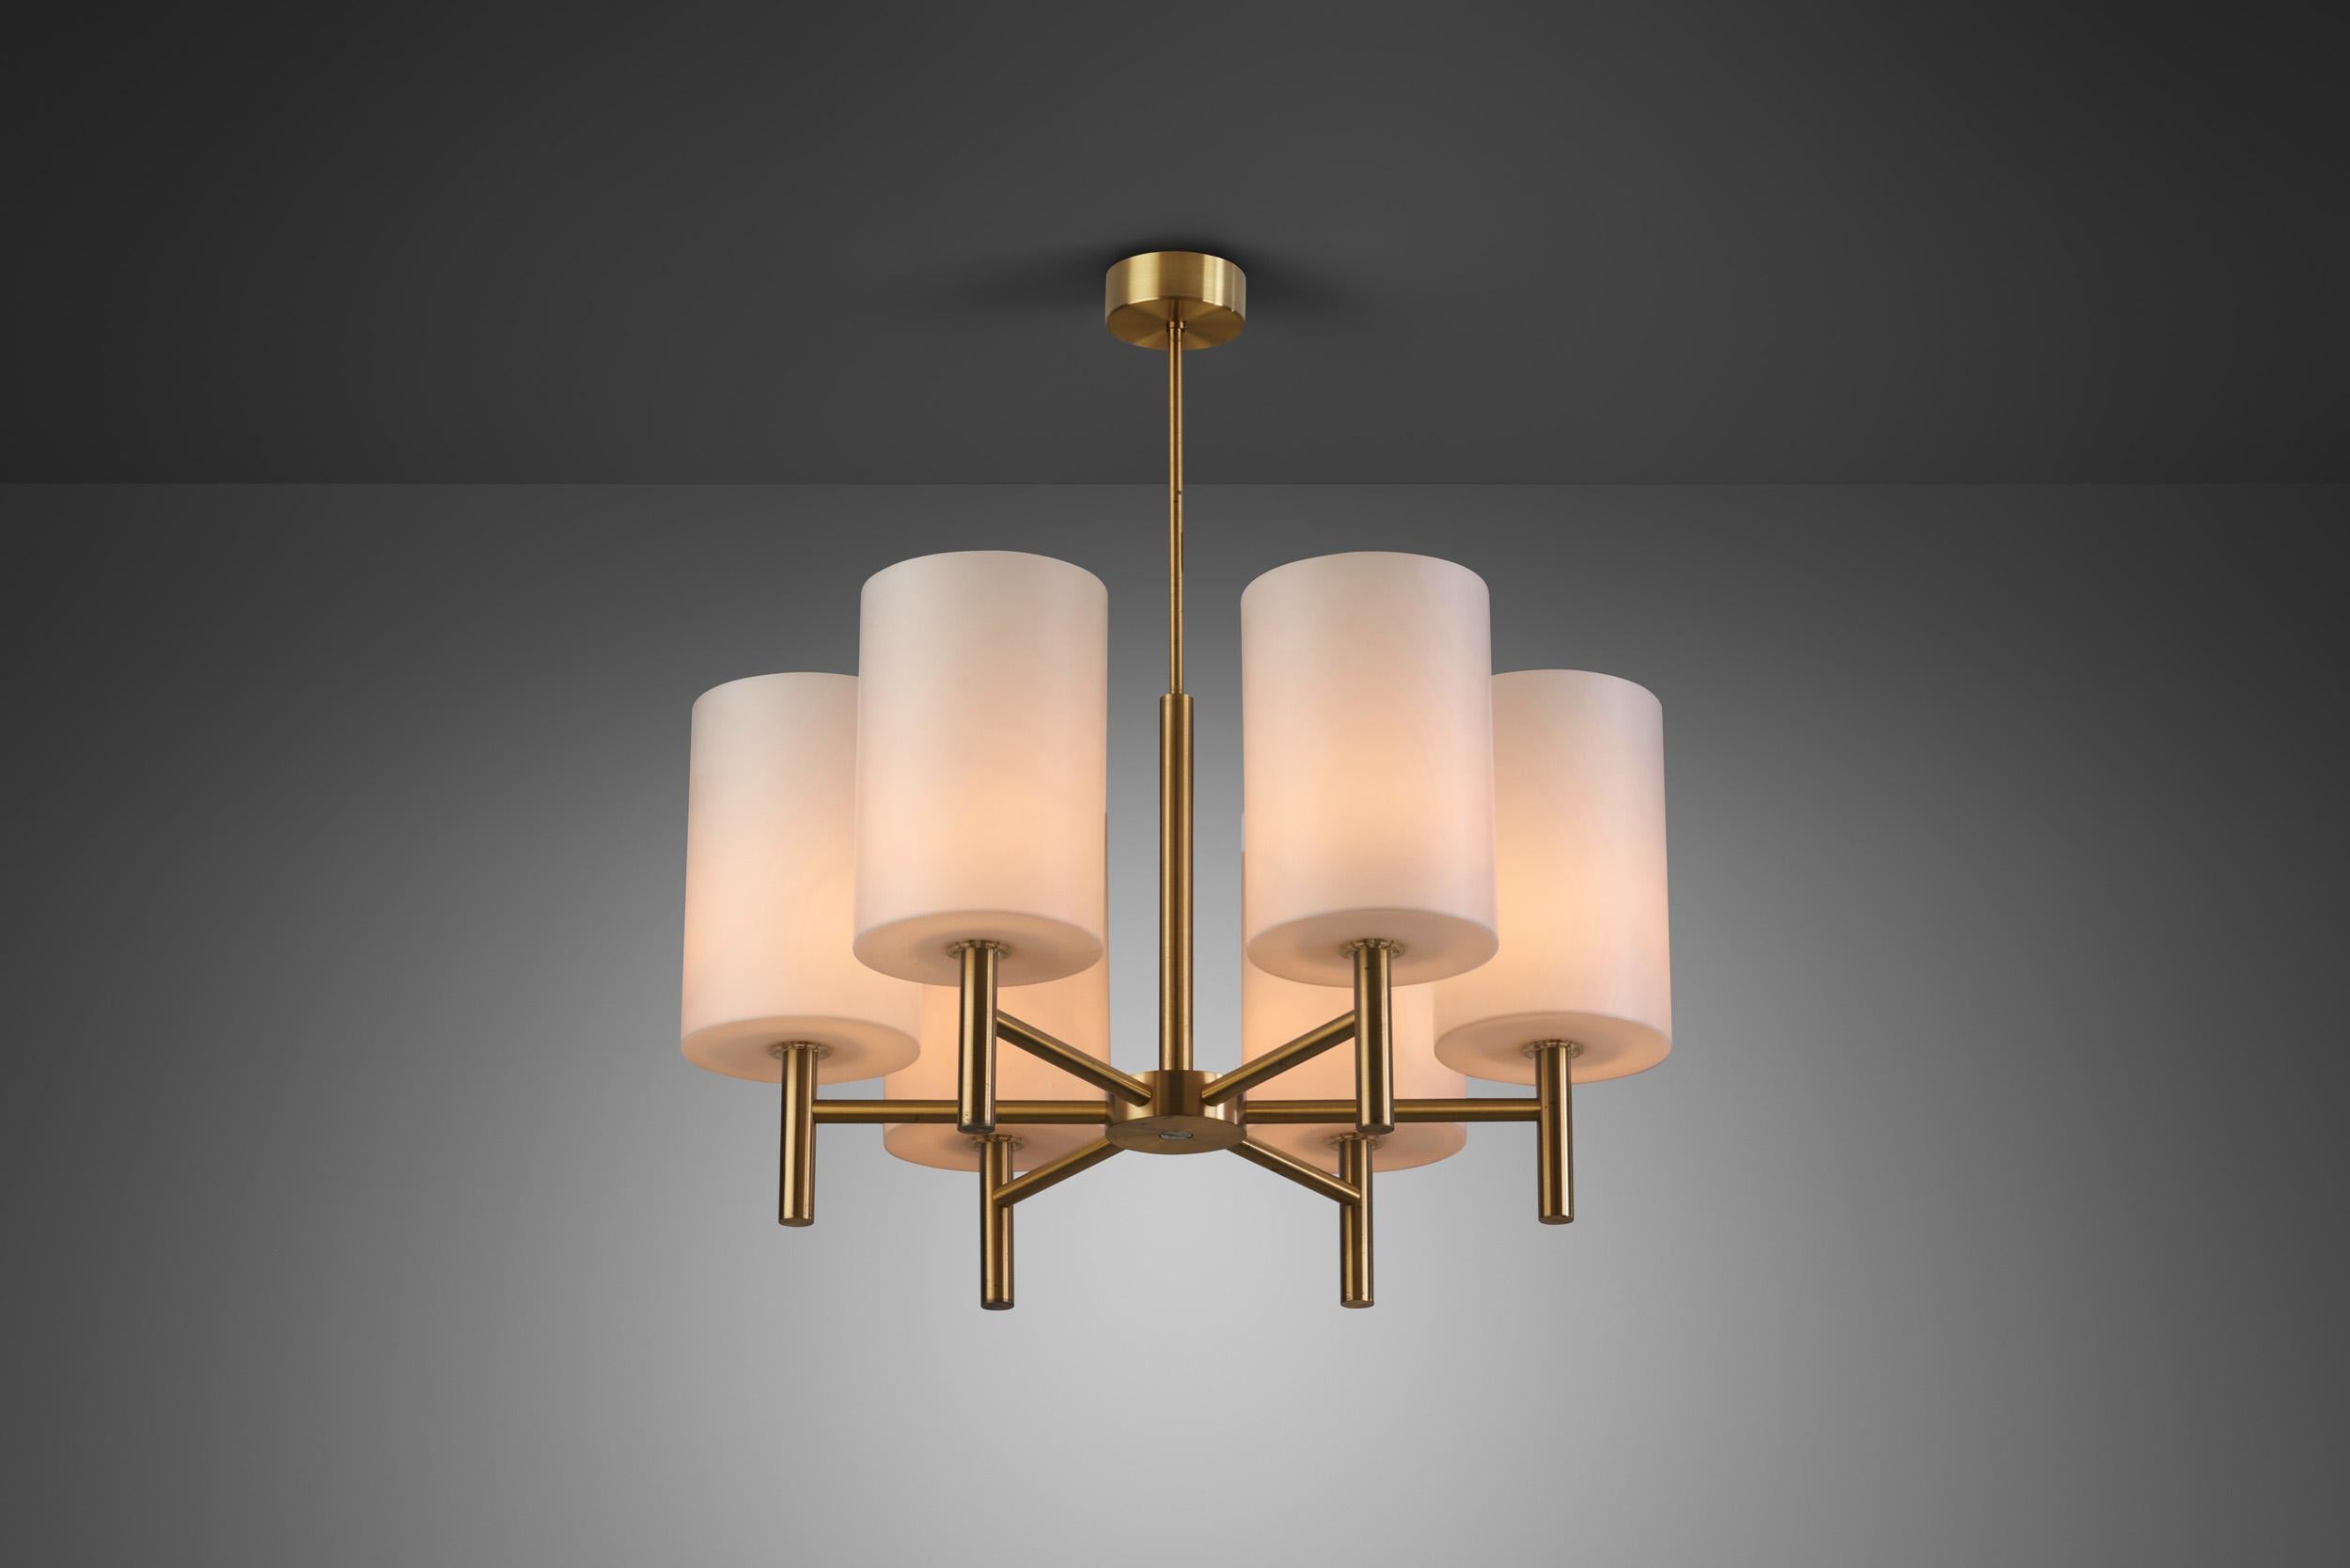 This marvellous, brass six-light ceiling light was created in what we now call “the golden age of Scandinavian design”. The period saw the revival of an elementary, undecorated visual language, emphasizing sleek design and craftsmanship as this